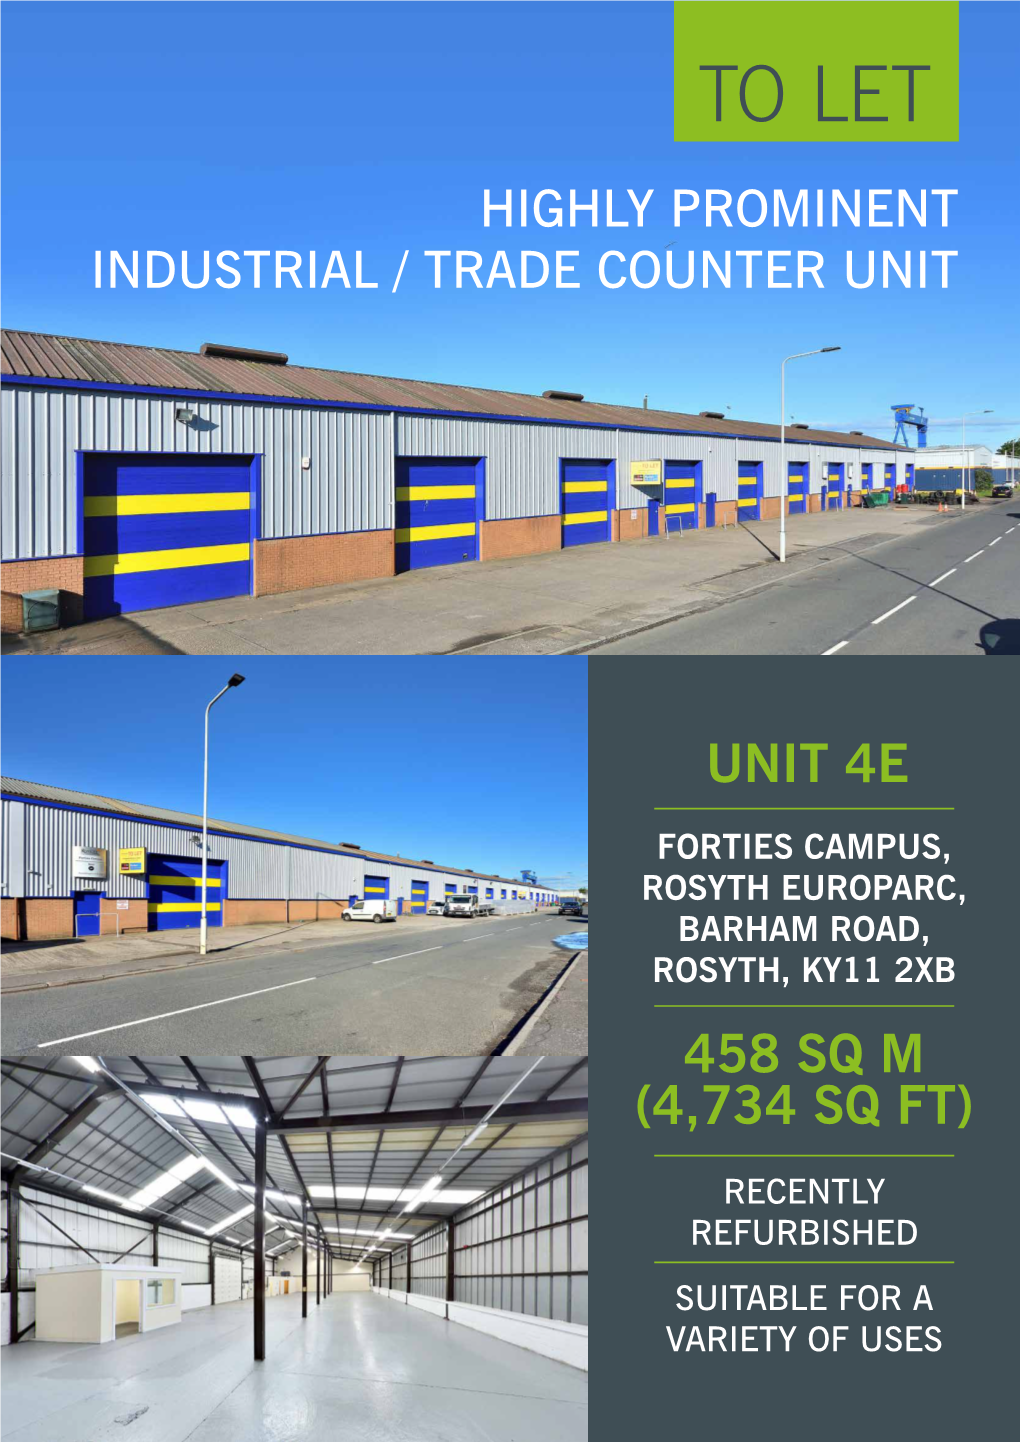 To Let Highly Prominent Industrial / Trade Counter Unit